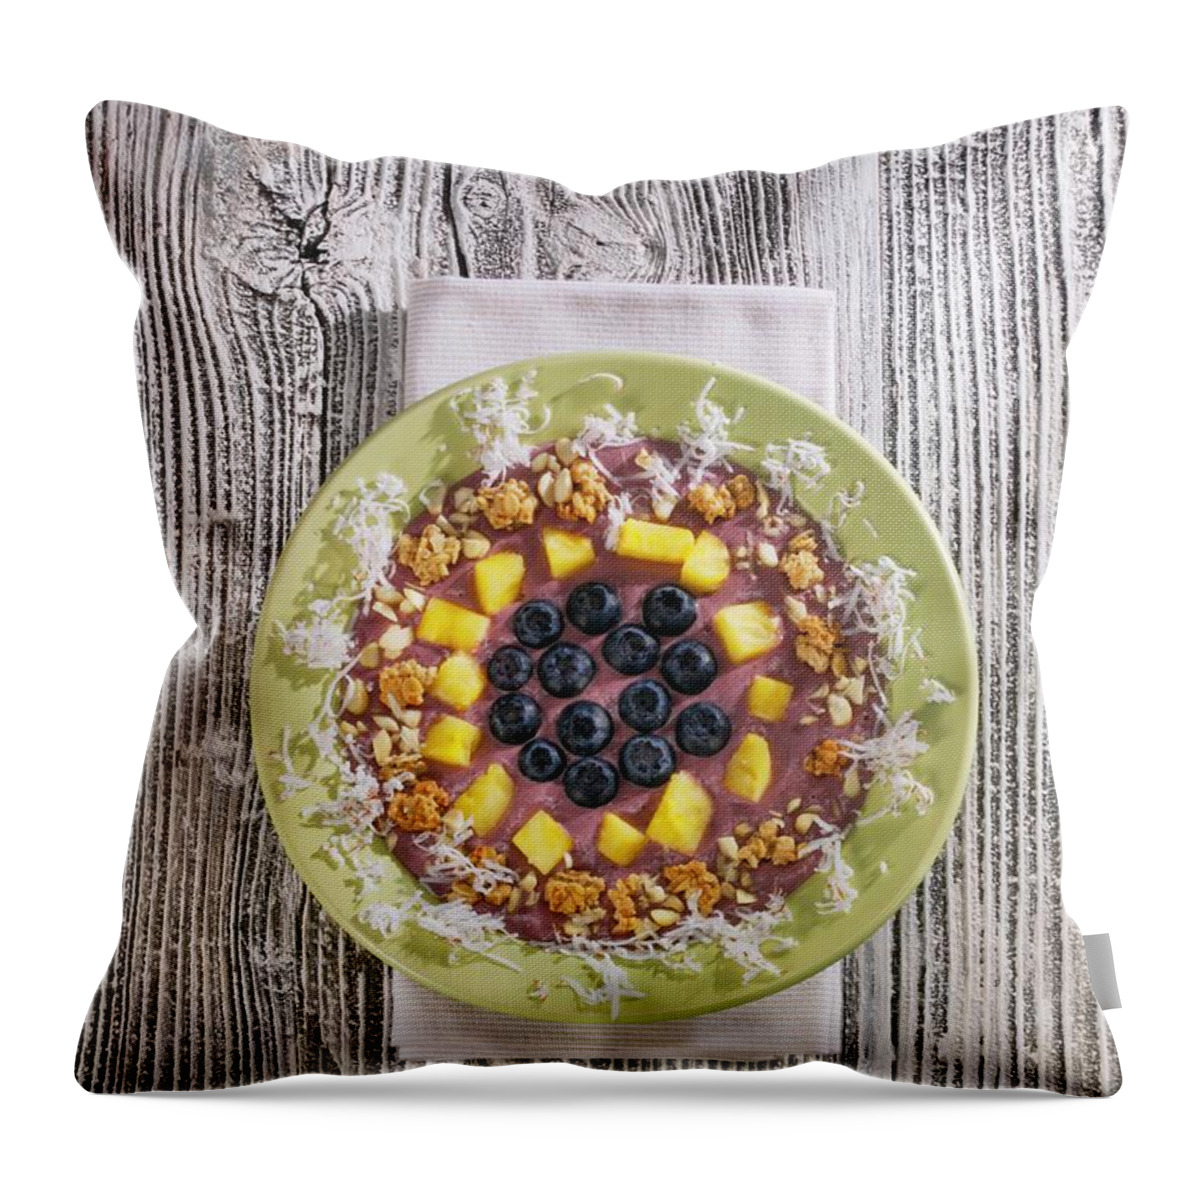 Ip_11980140 Throw Pillow featuring the photograph A Banana And Acai Berry Smoothie Bowl #1 by Karl Newedel